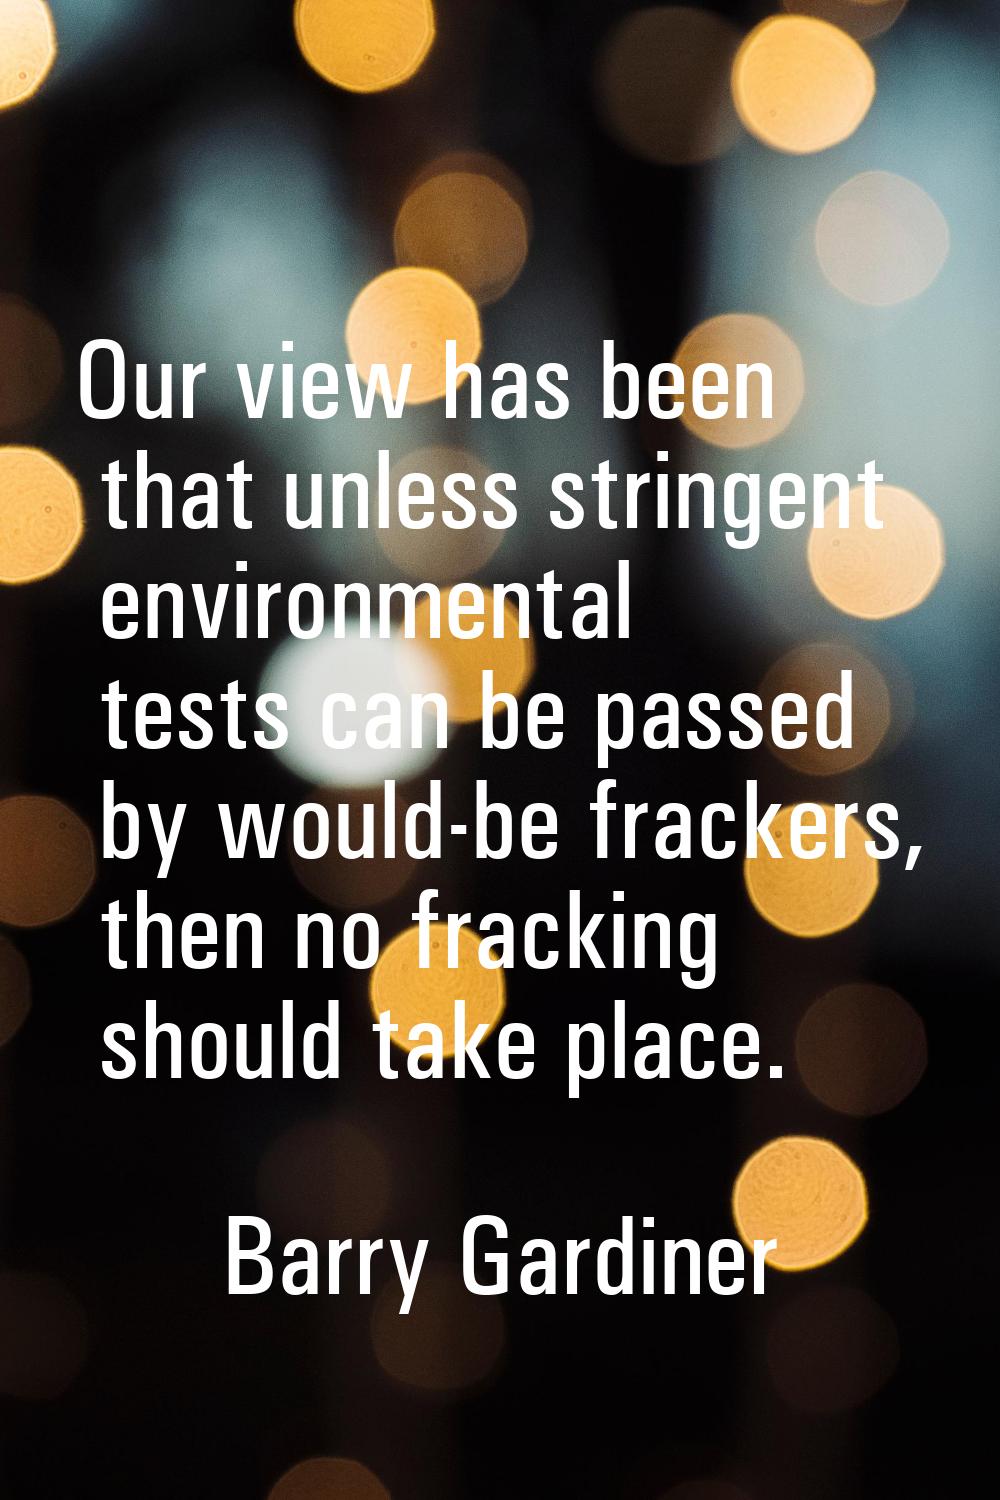 Our view has been that unless stringent environmental tests can be passed by would-be frackers, the